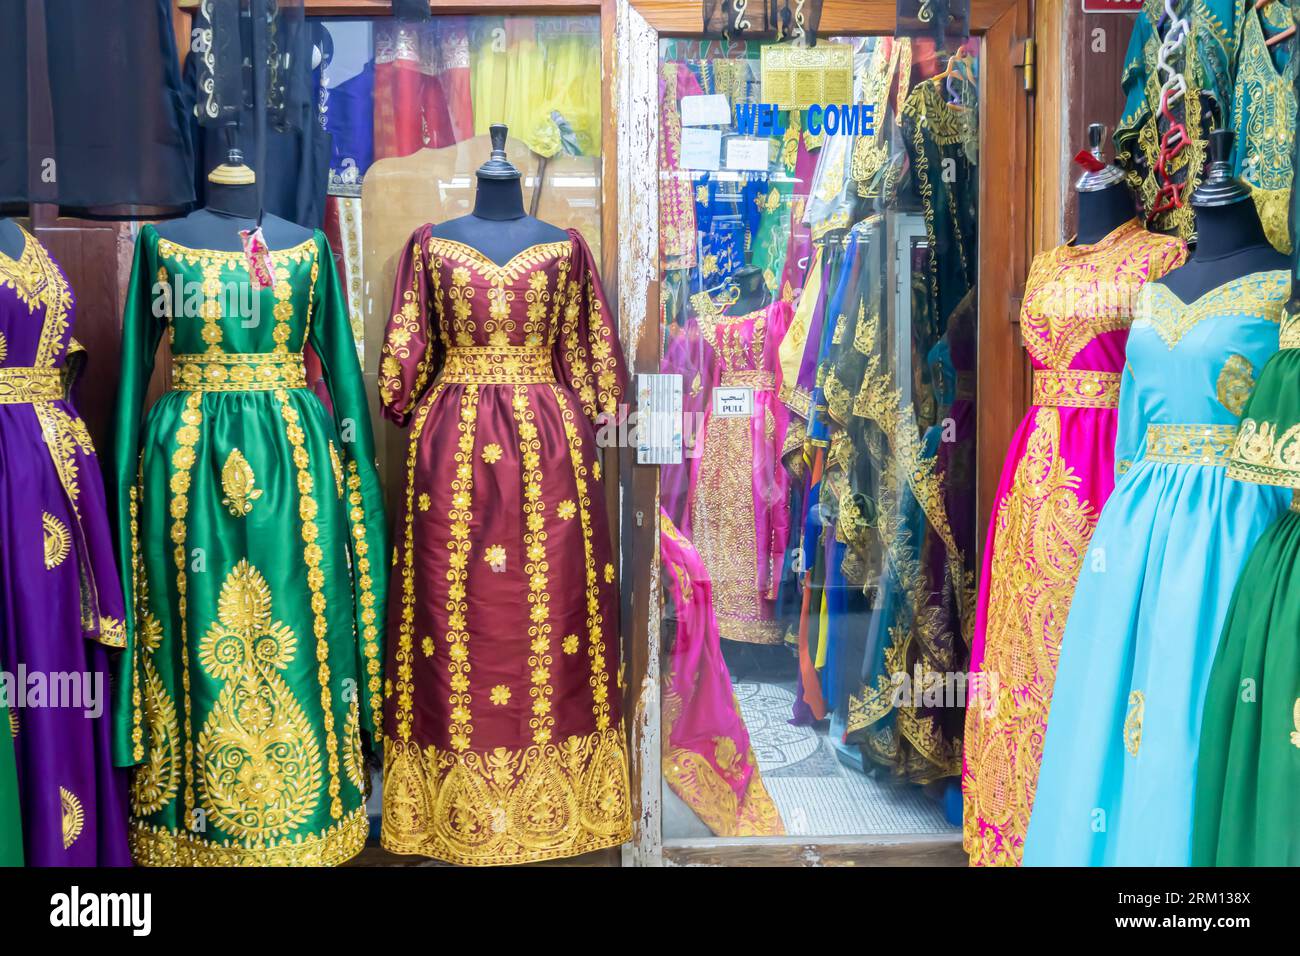 Colorful women's clothing sold in Manama Bahrain. Women's dresses on display in the store in Manama Bahrain Stock Photo